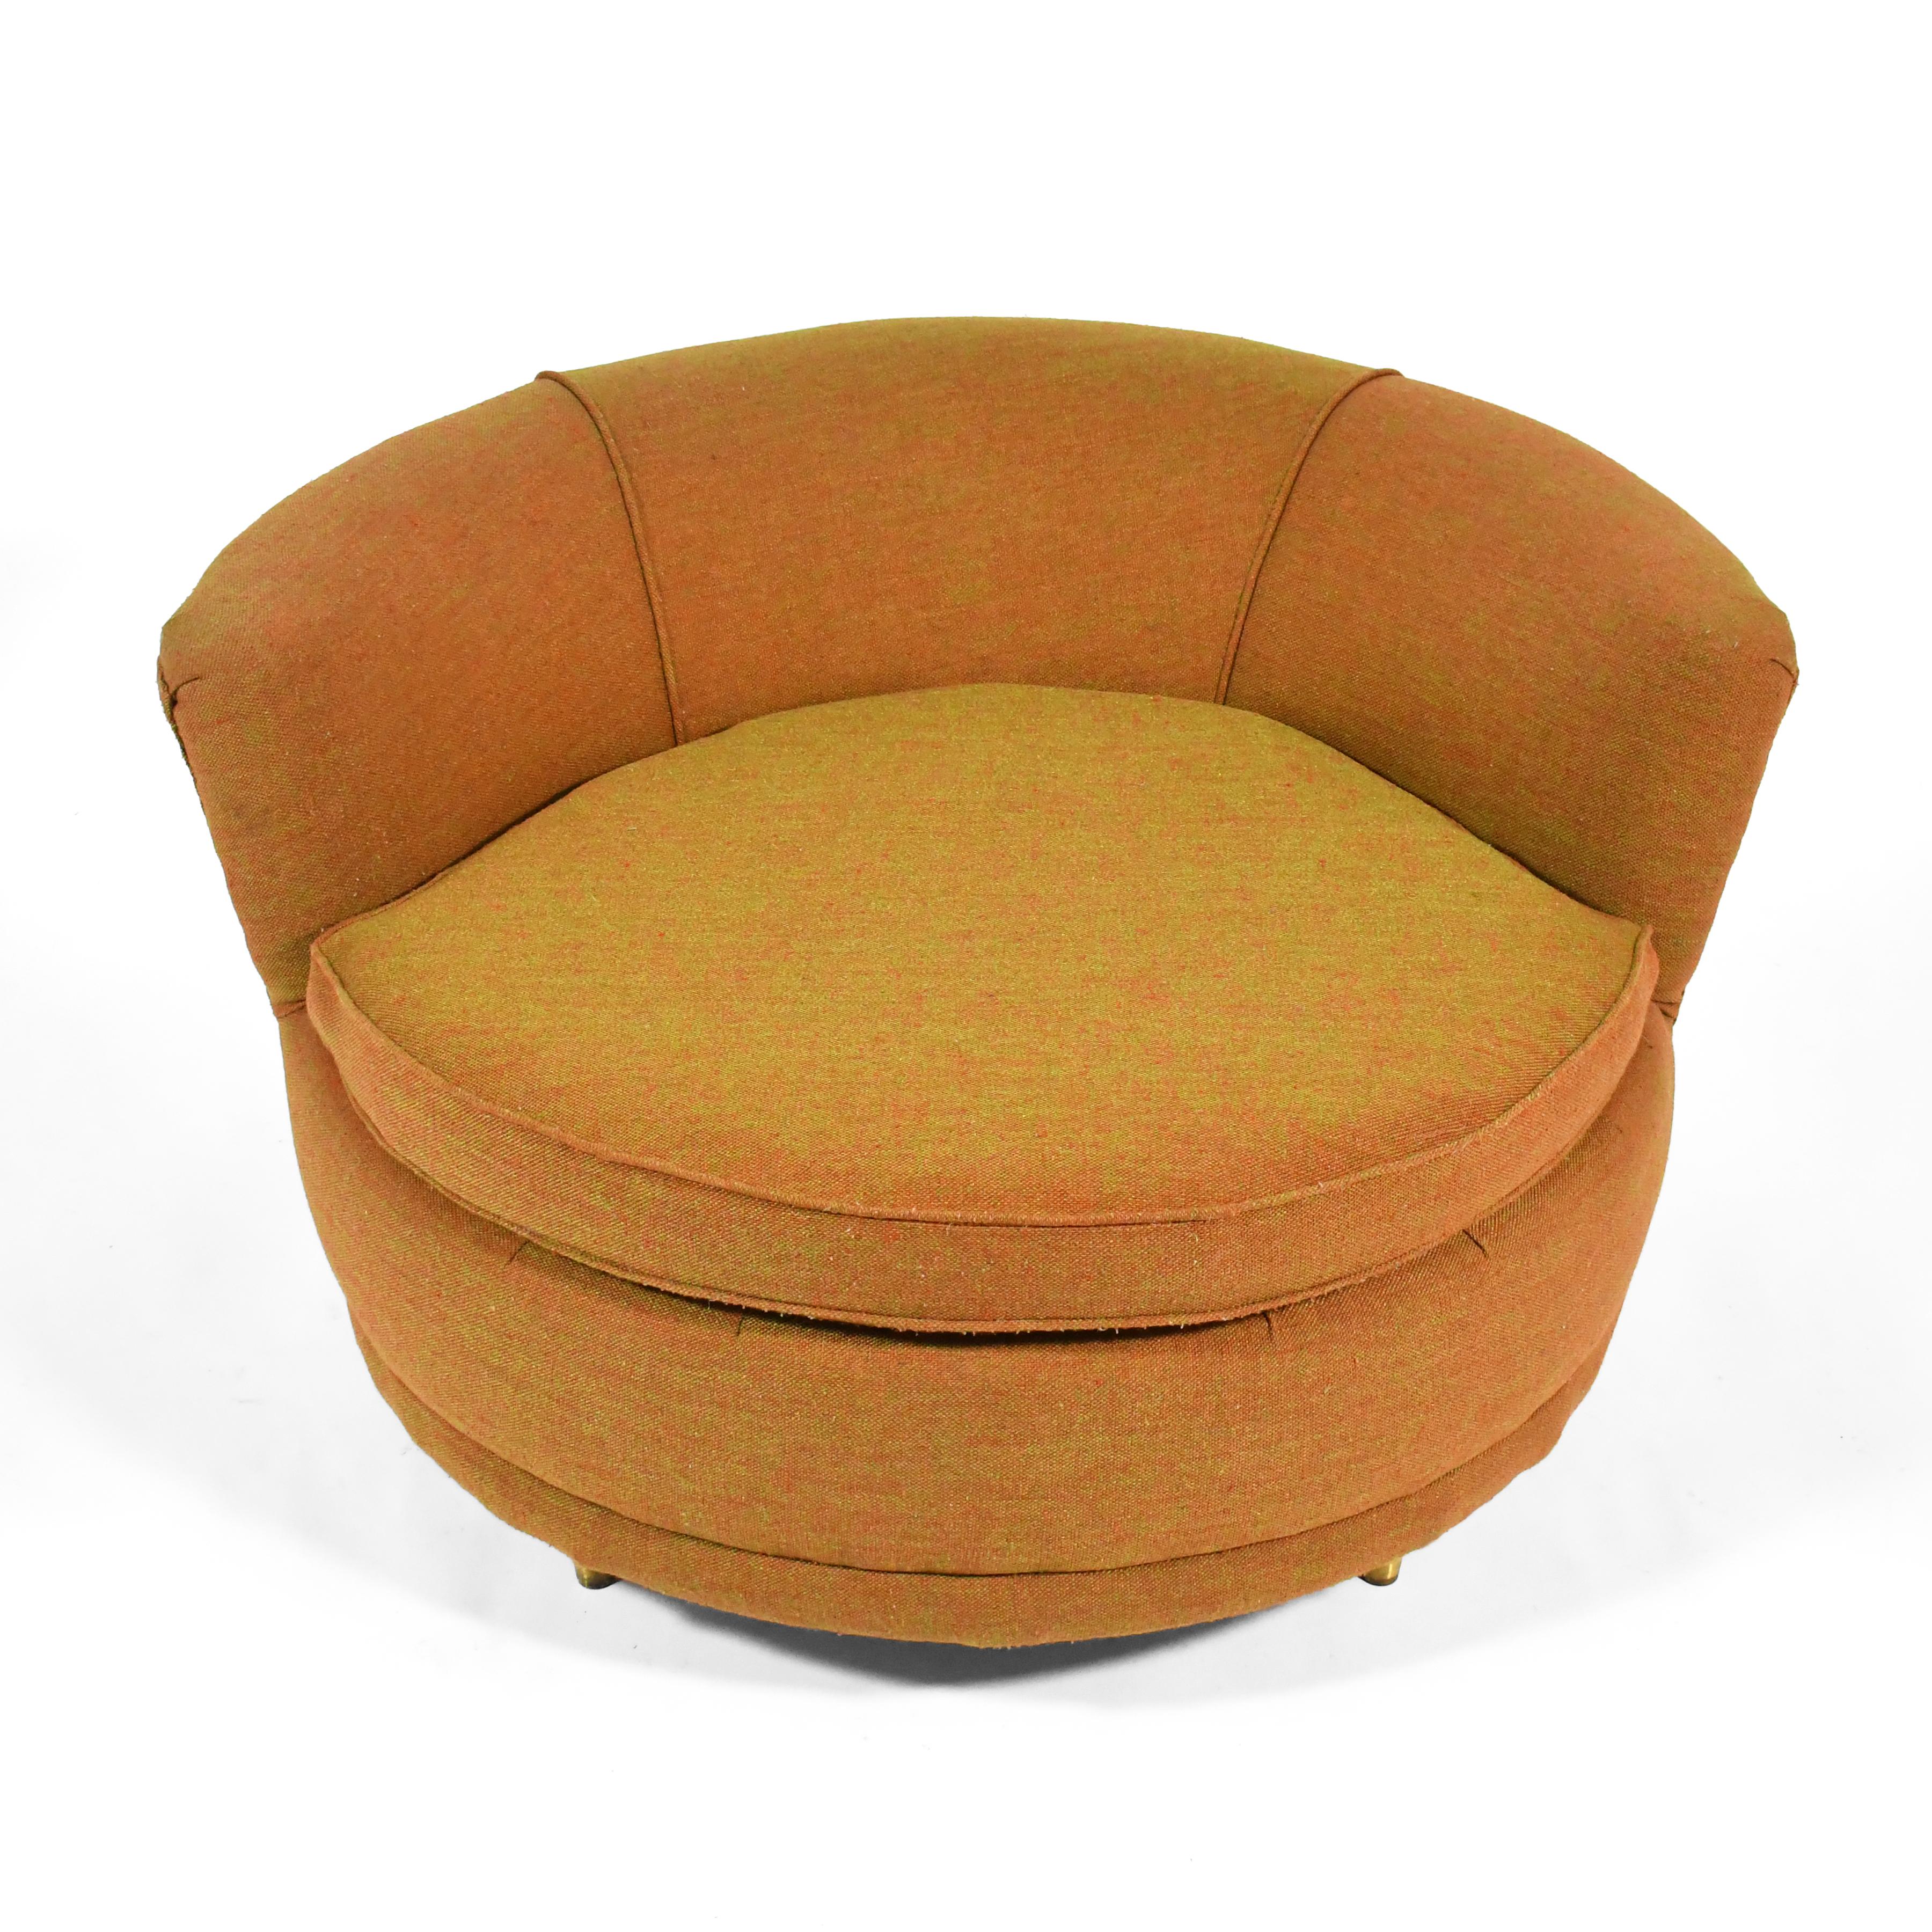 Where did Adrian Pearsall get all those ideas for the designs he made for Craft Assoc. in the 60s? Well, he took inspiration from designs like this wonderful 1950s Parlor chair by Howard. This great big, round chair is a beautiful sculptural form in